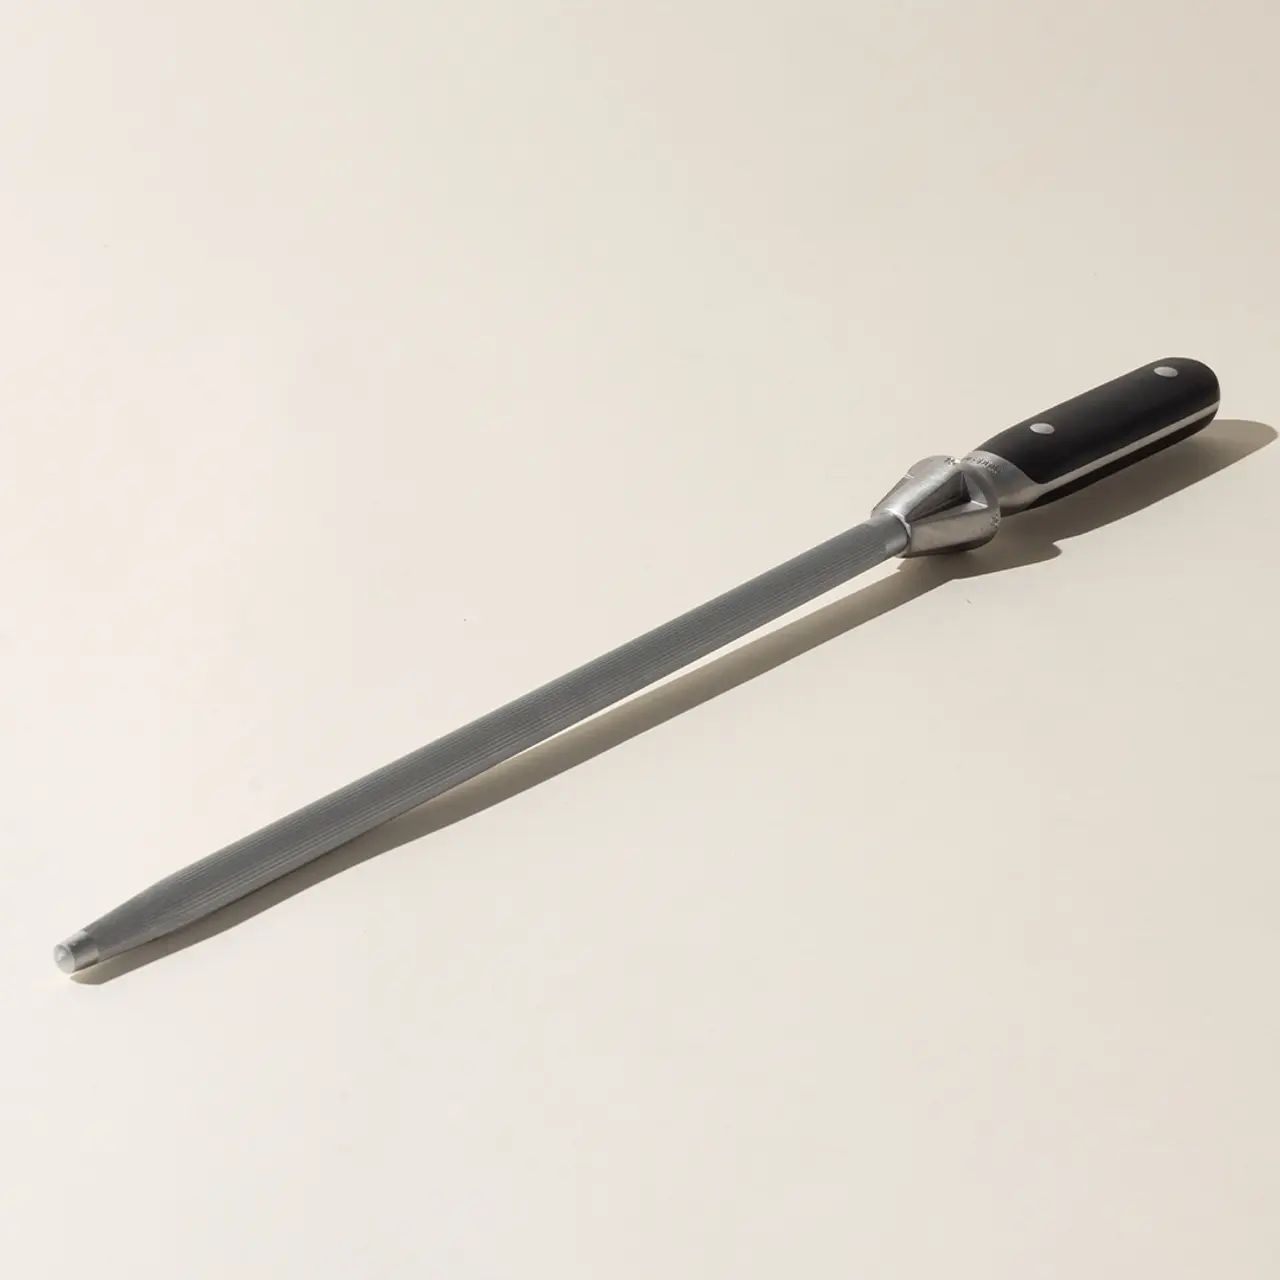 A long-handled sharpening steel lies on a plain surface, casting a soft shadow to one side.